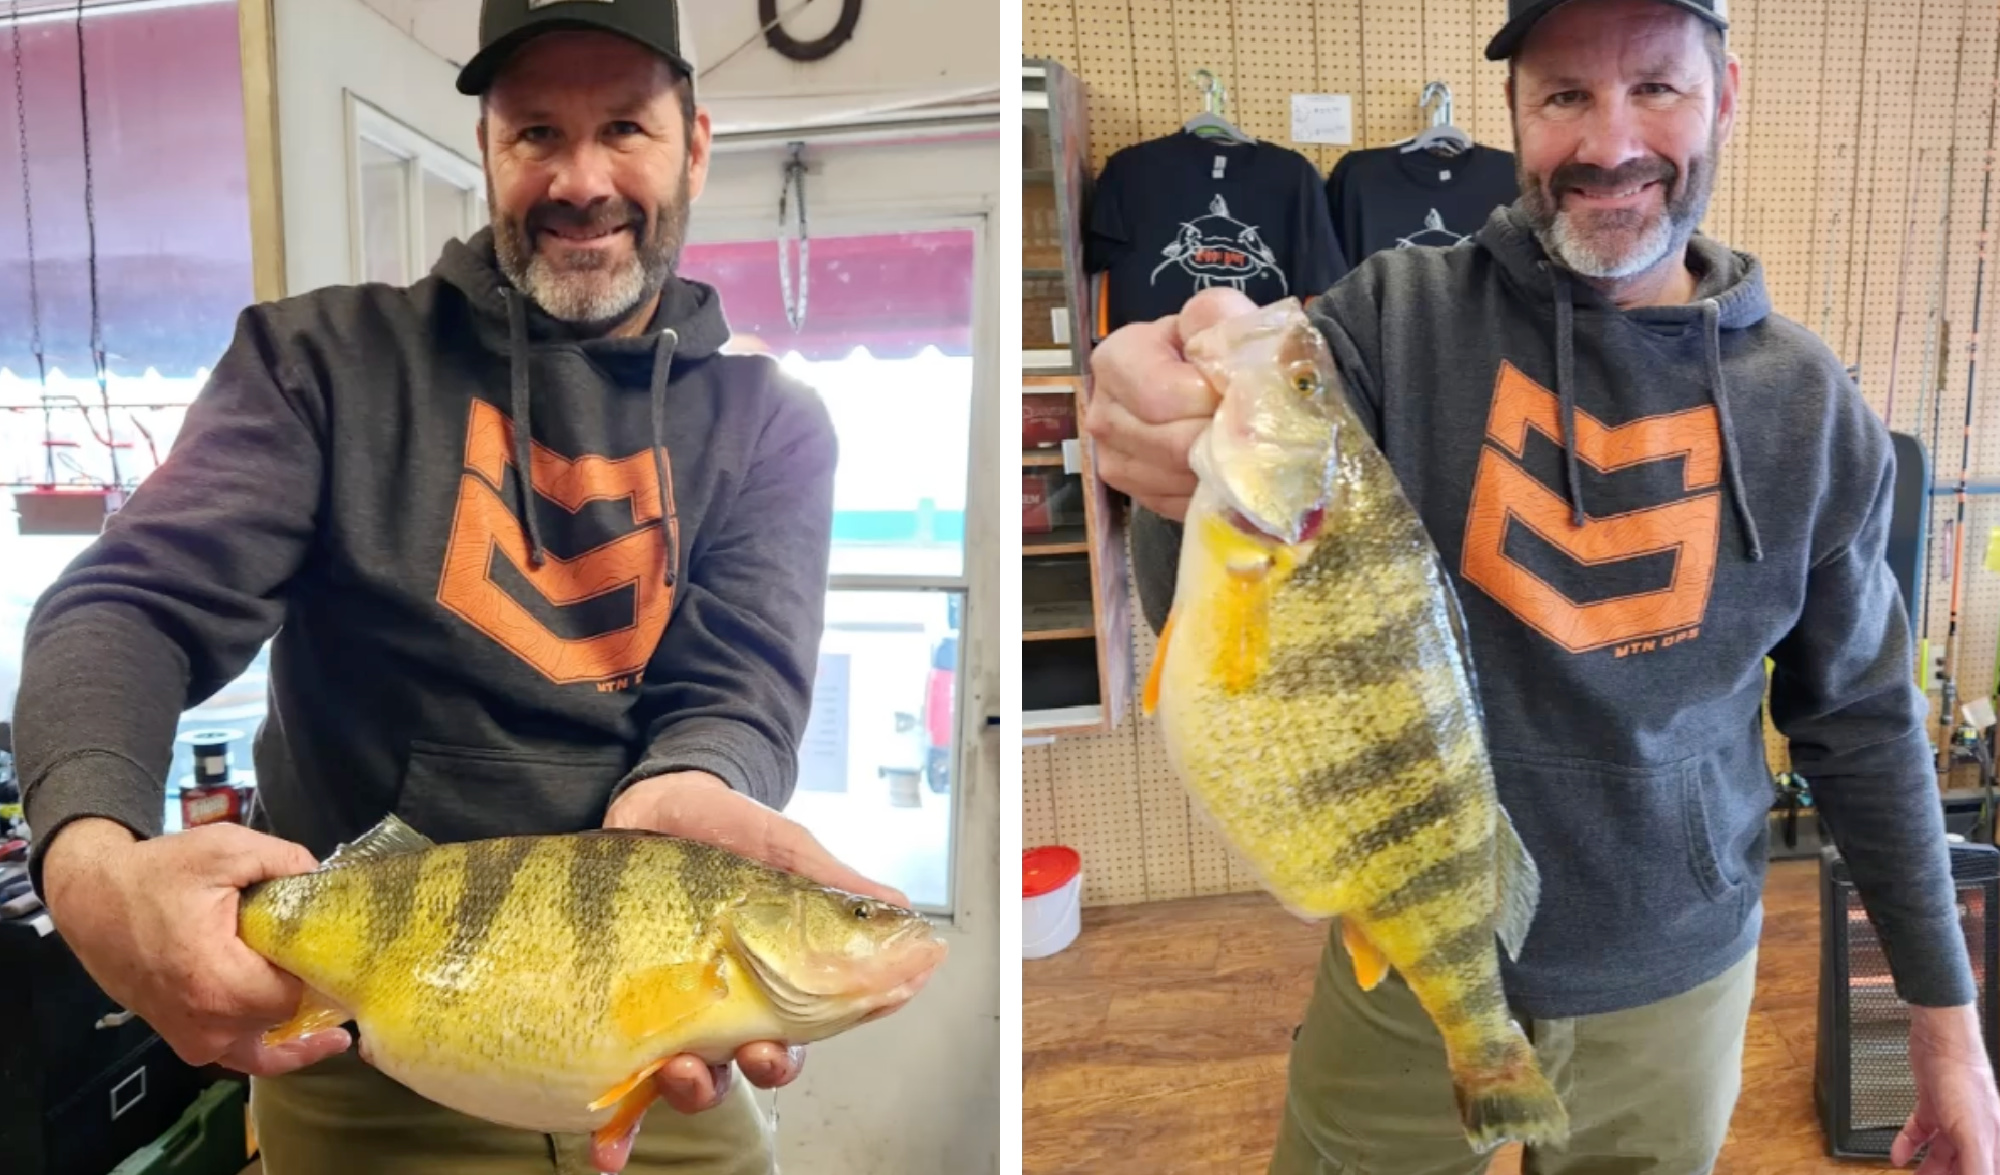 Chuck Main holds a potential state record-tying yellow perch.